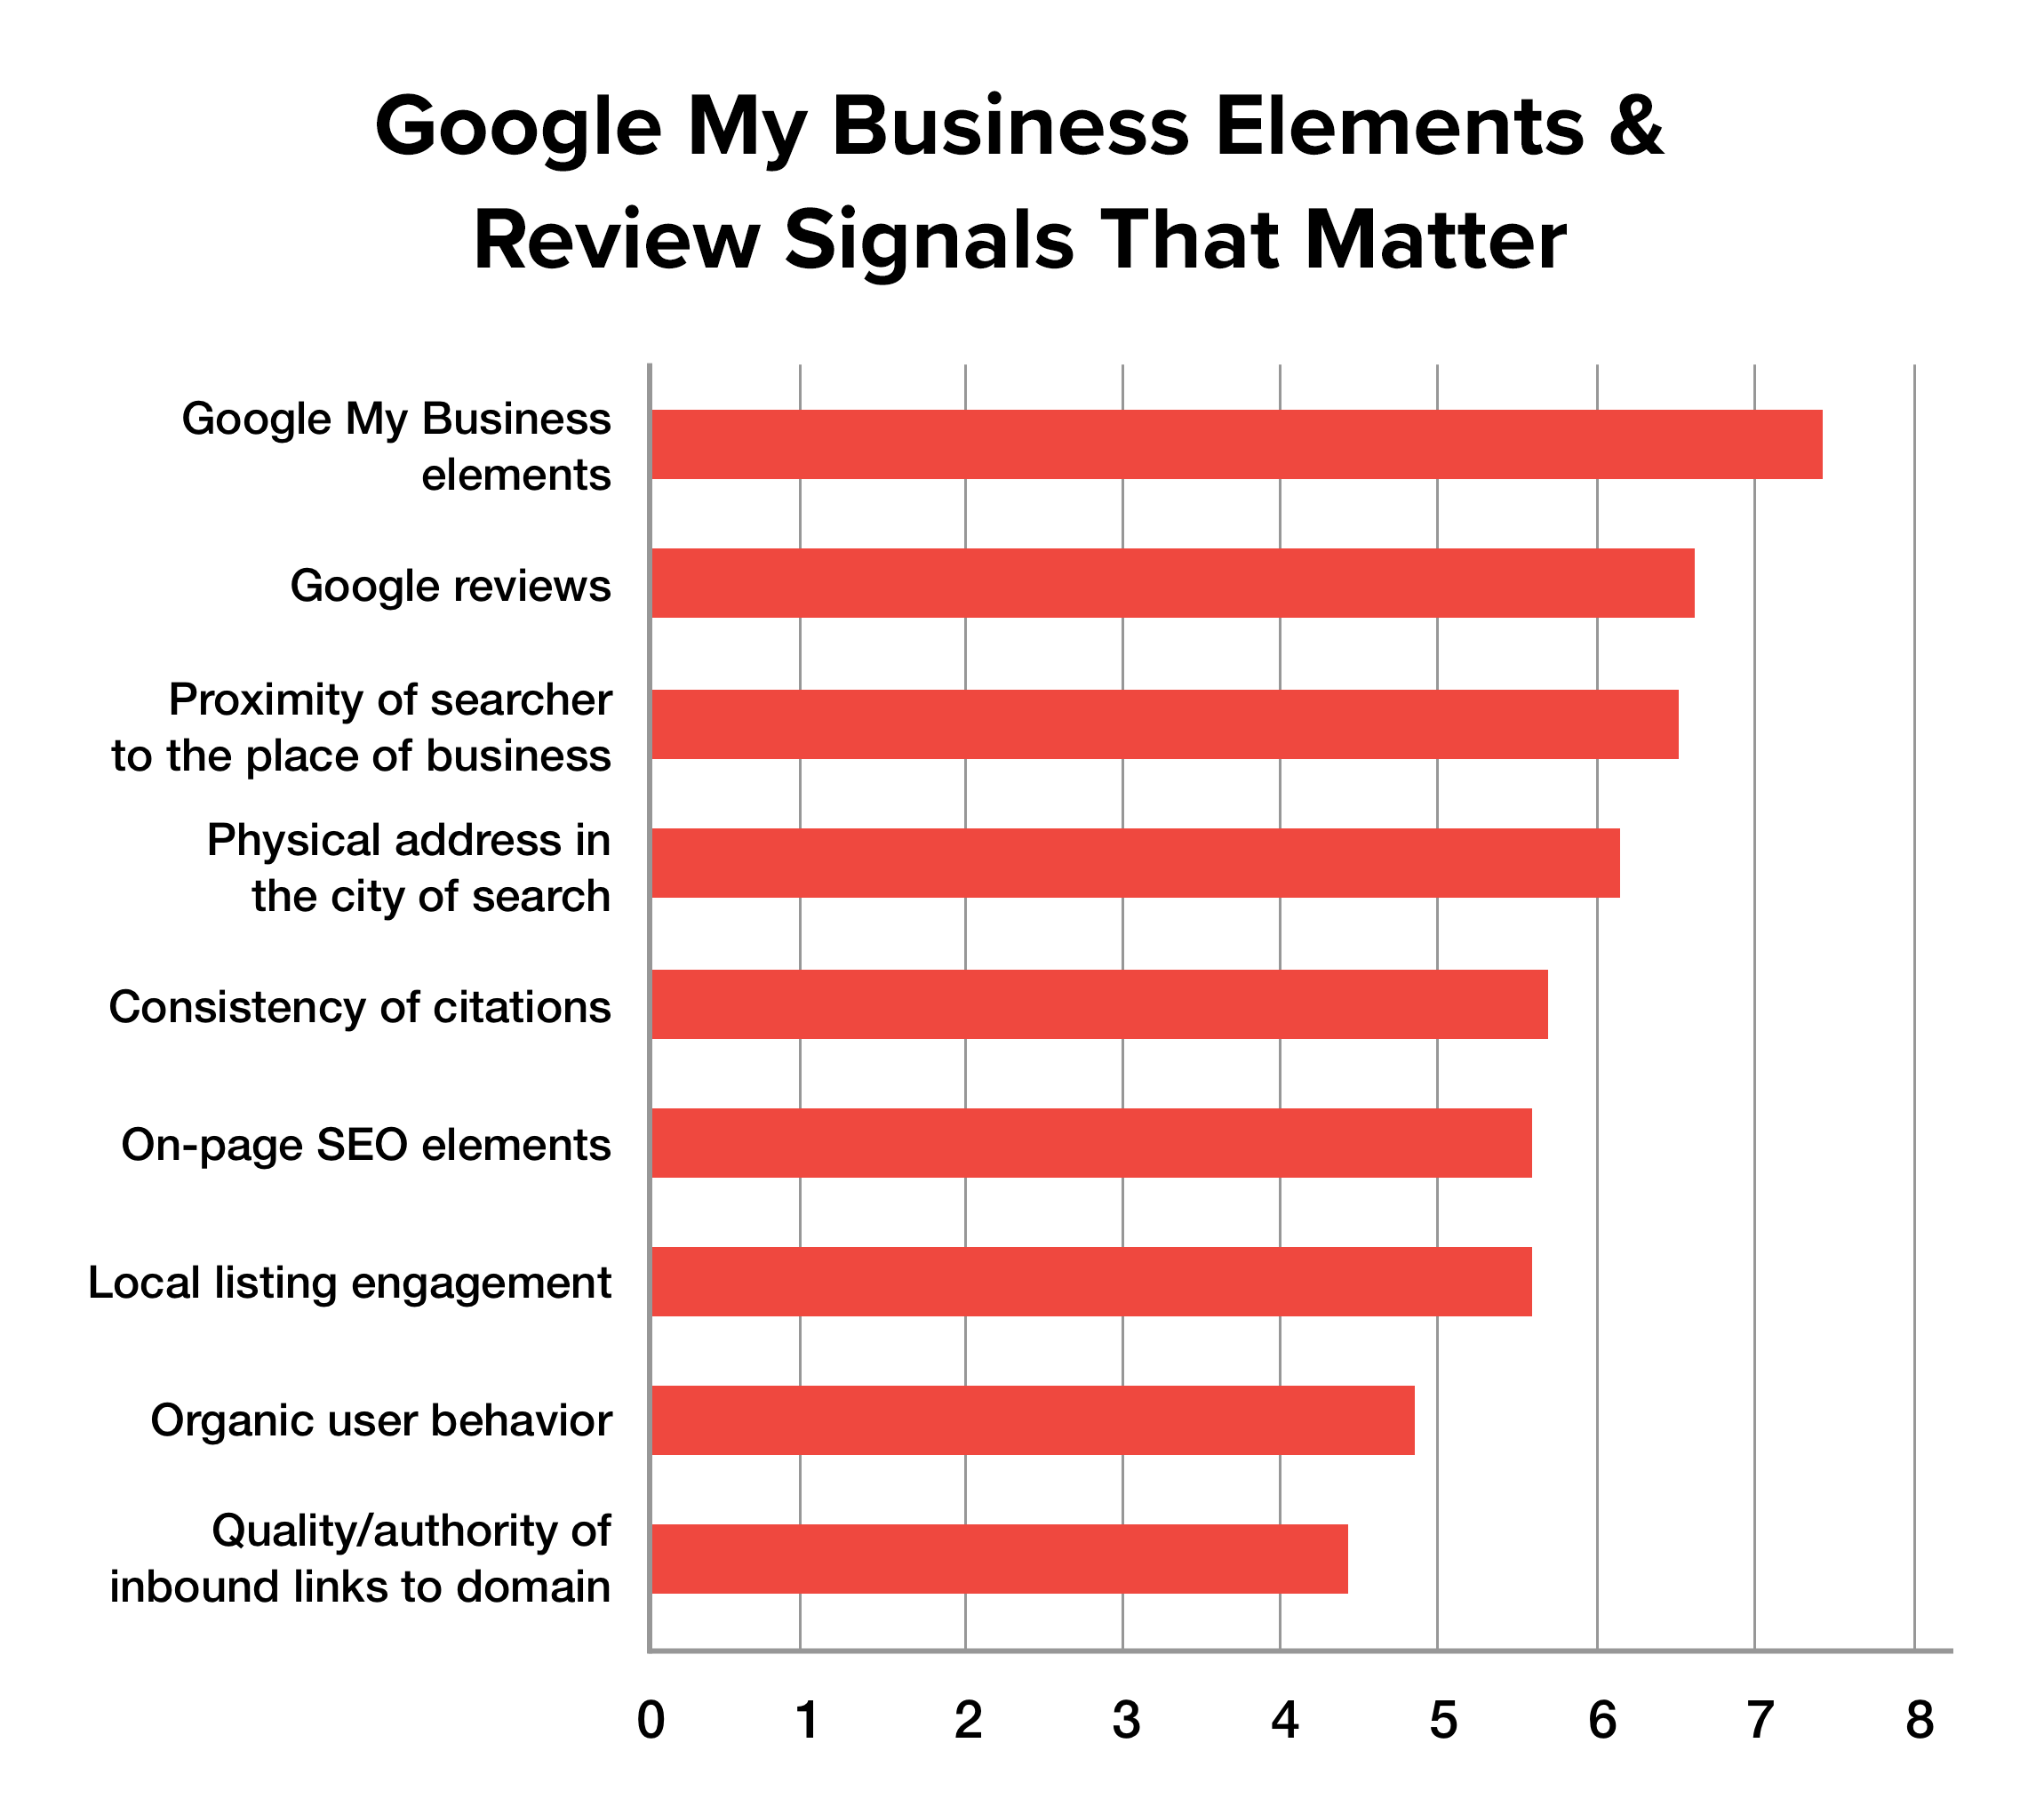 Google My Business elements and reviews signals chart